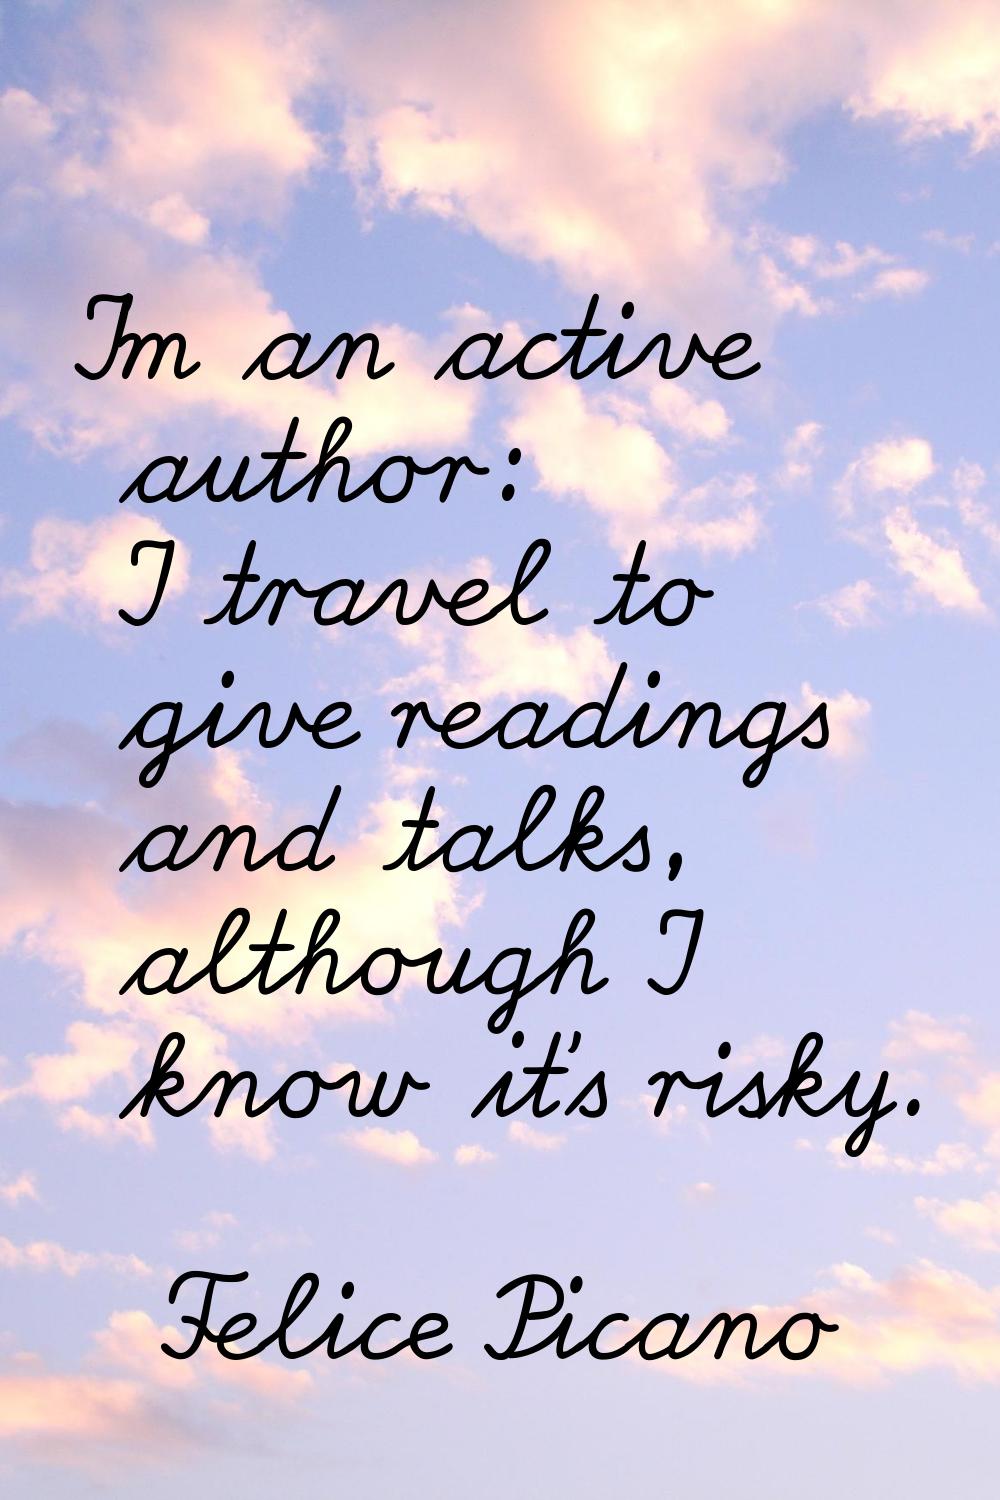 I'm an active author: I travel to give readings and talks, although I know it's risky.